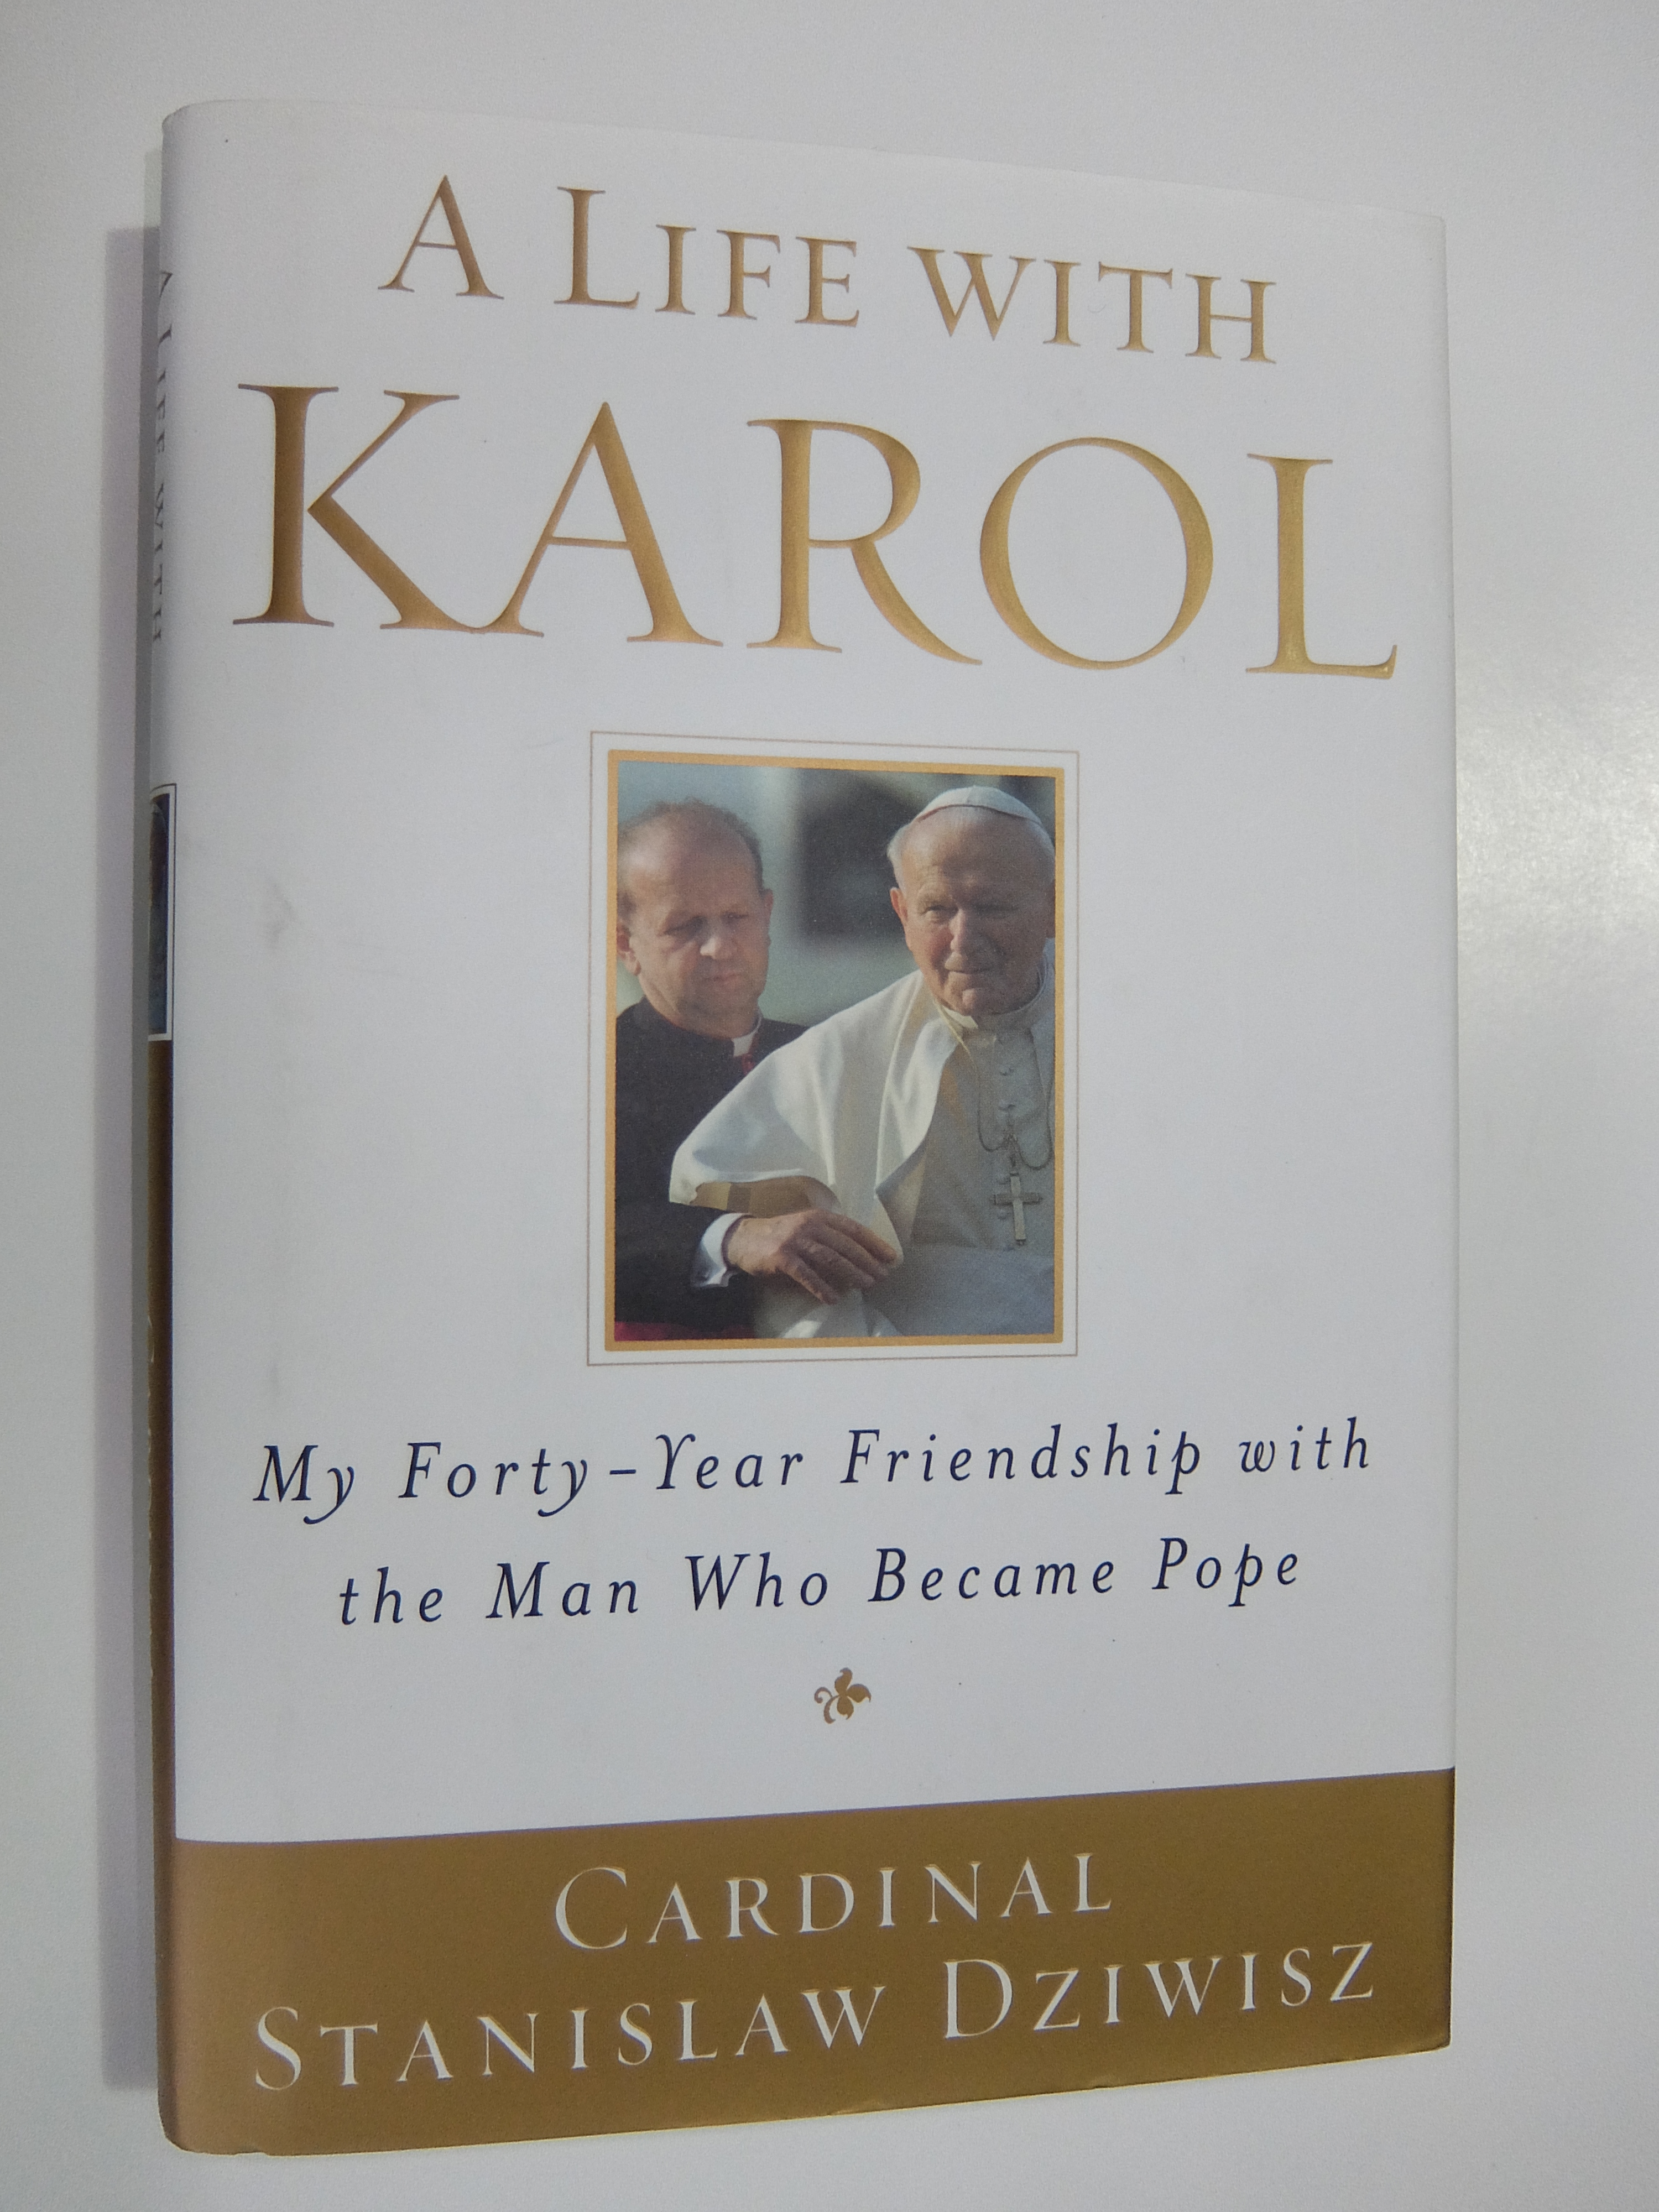 A Life with Karol - My Forty Year Friendship with the Man Who Became Pope Image